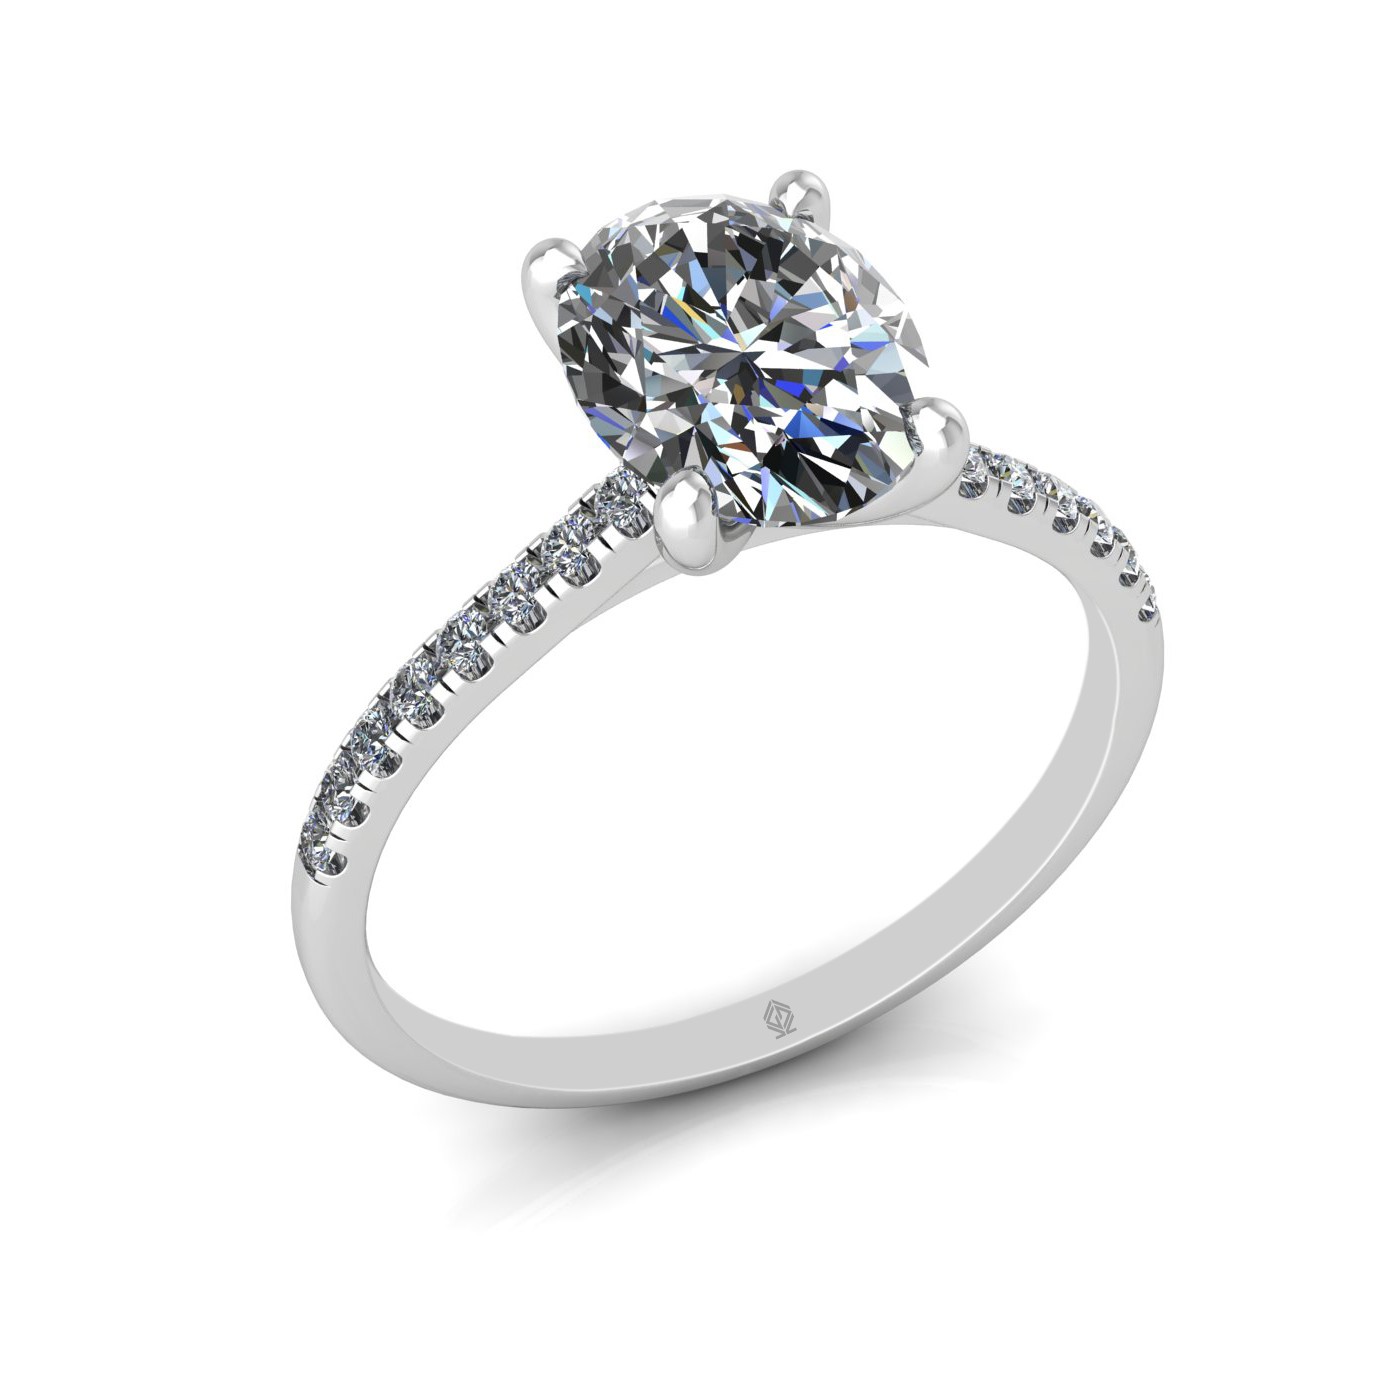 18k white gold  1,50 ct 4 prongs oval cut diamond engagement ring with whisper thin pavÉ set band